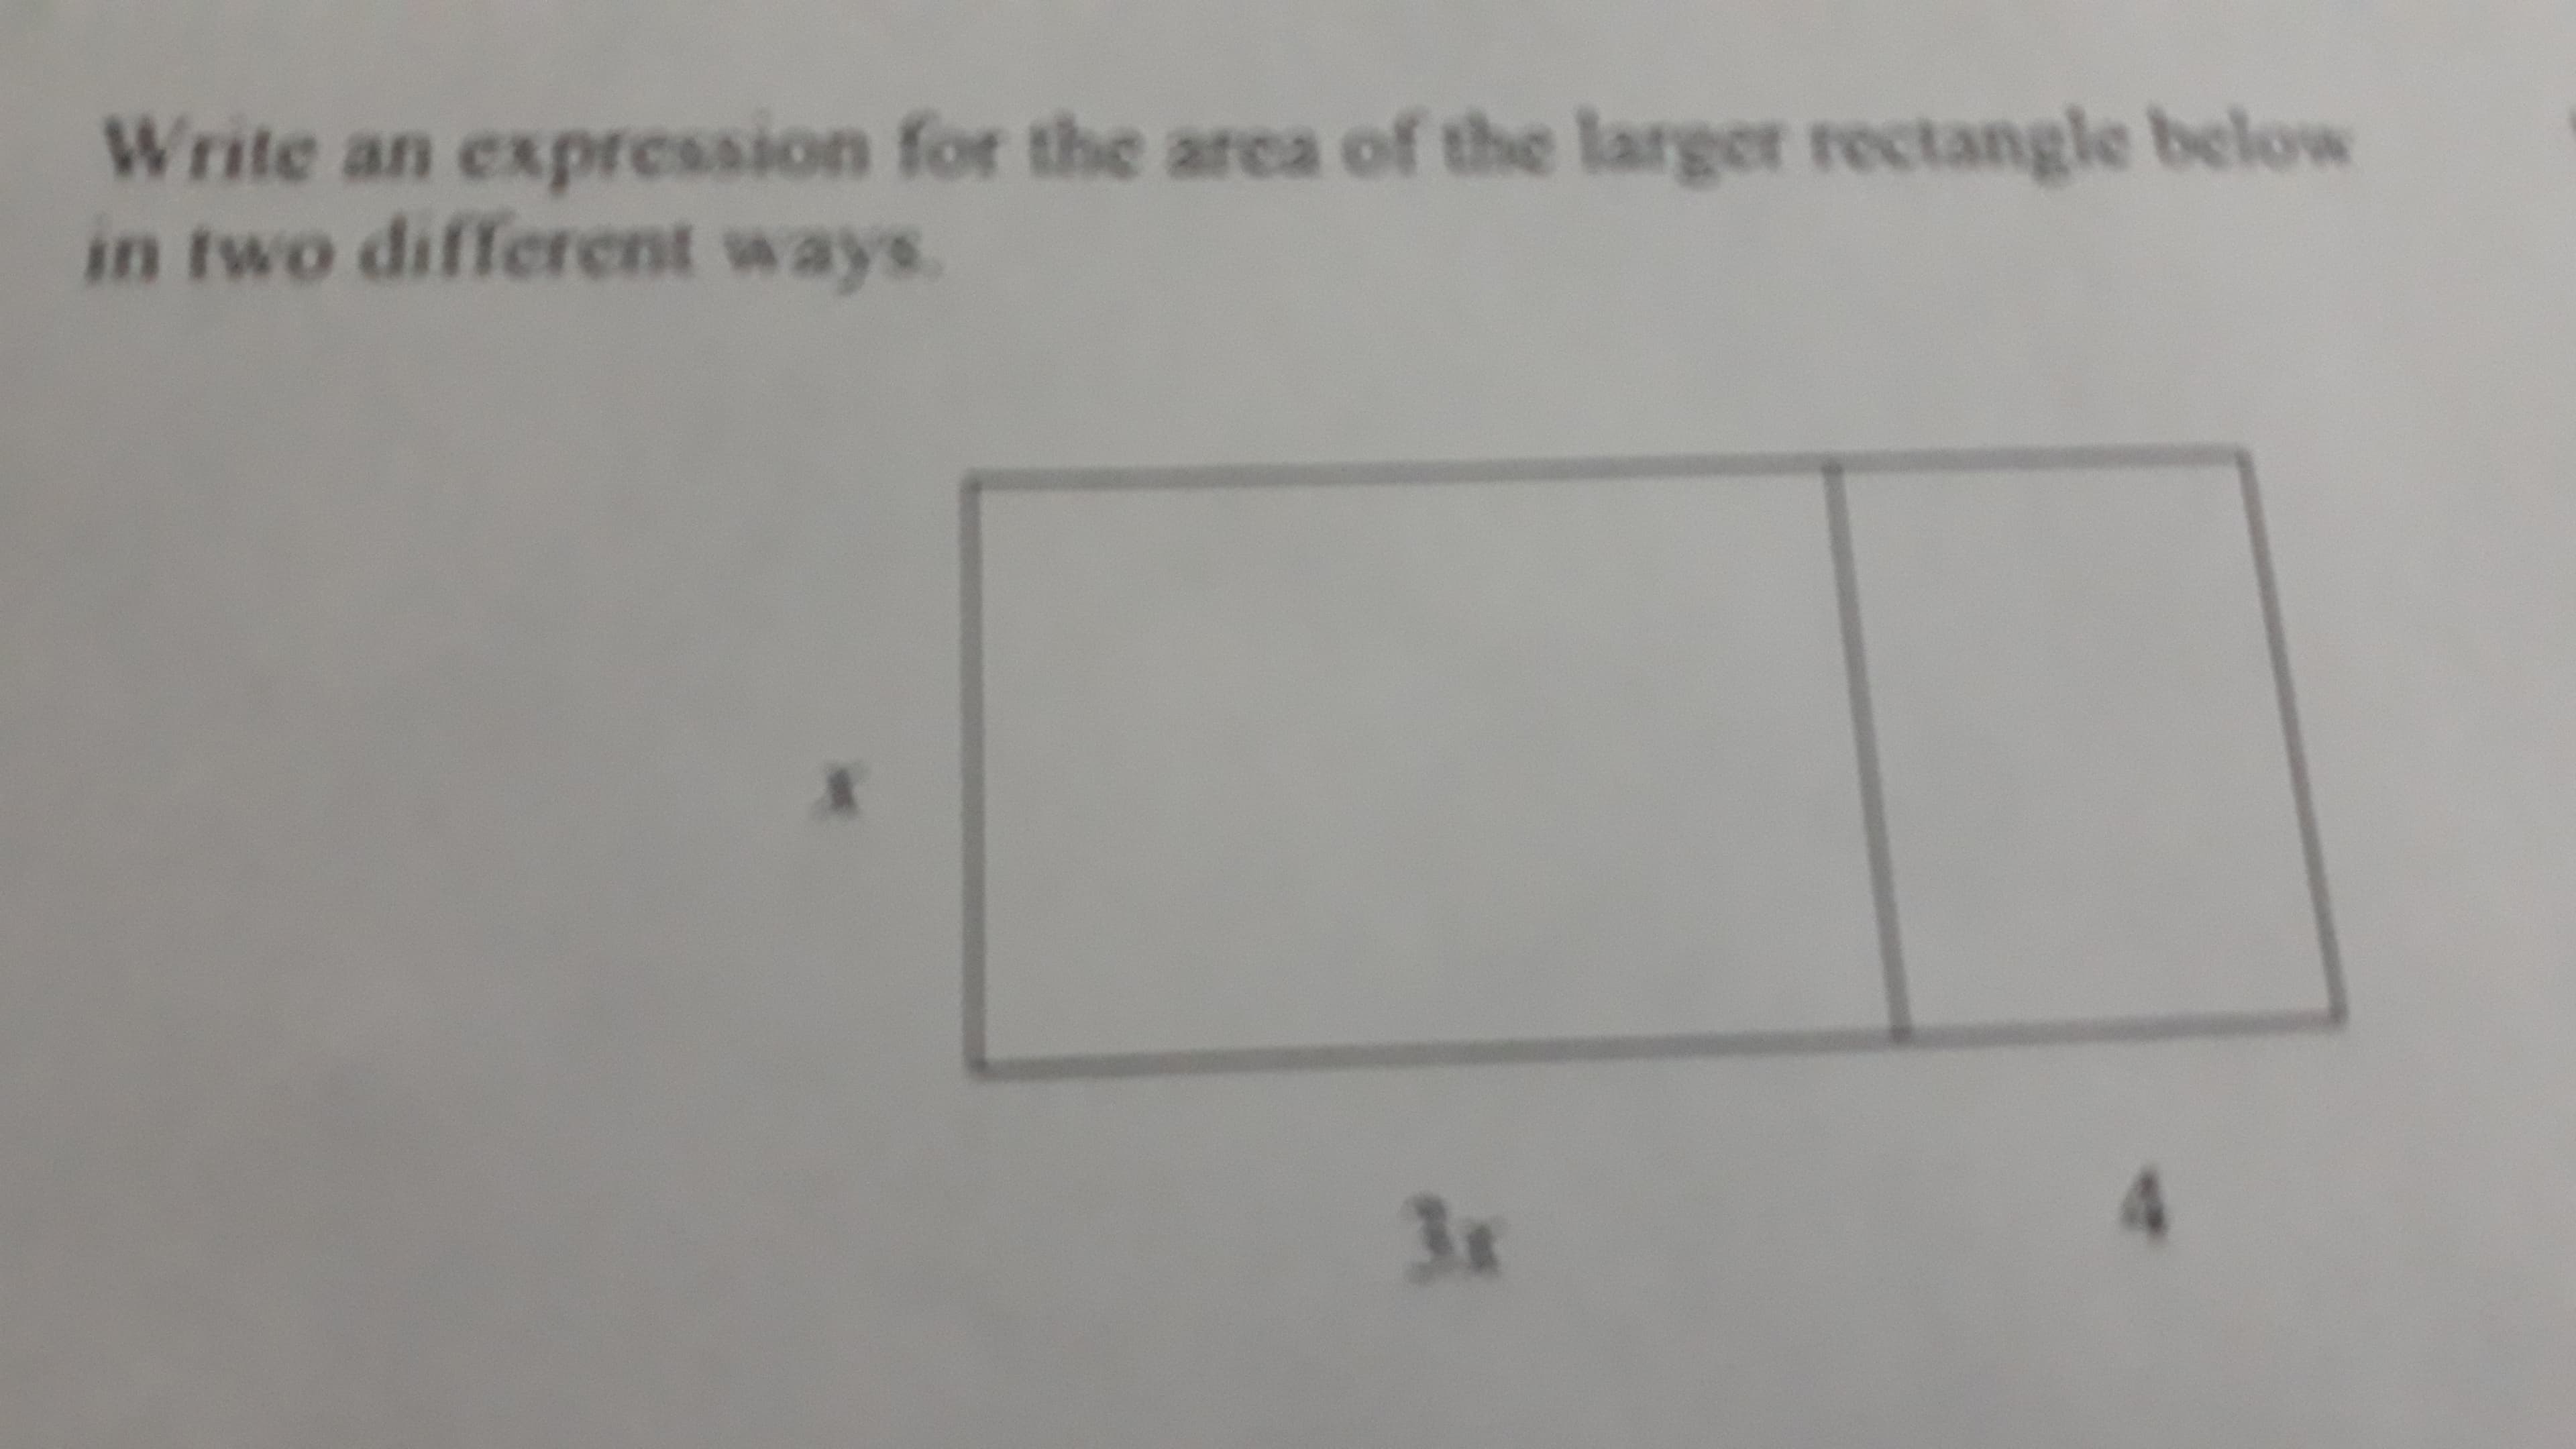 Write an expression for the area of the larger rectangle below
in two different ways.
3x
